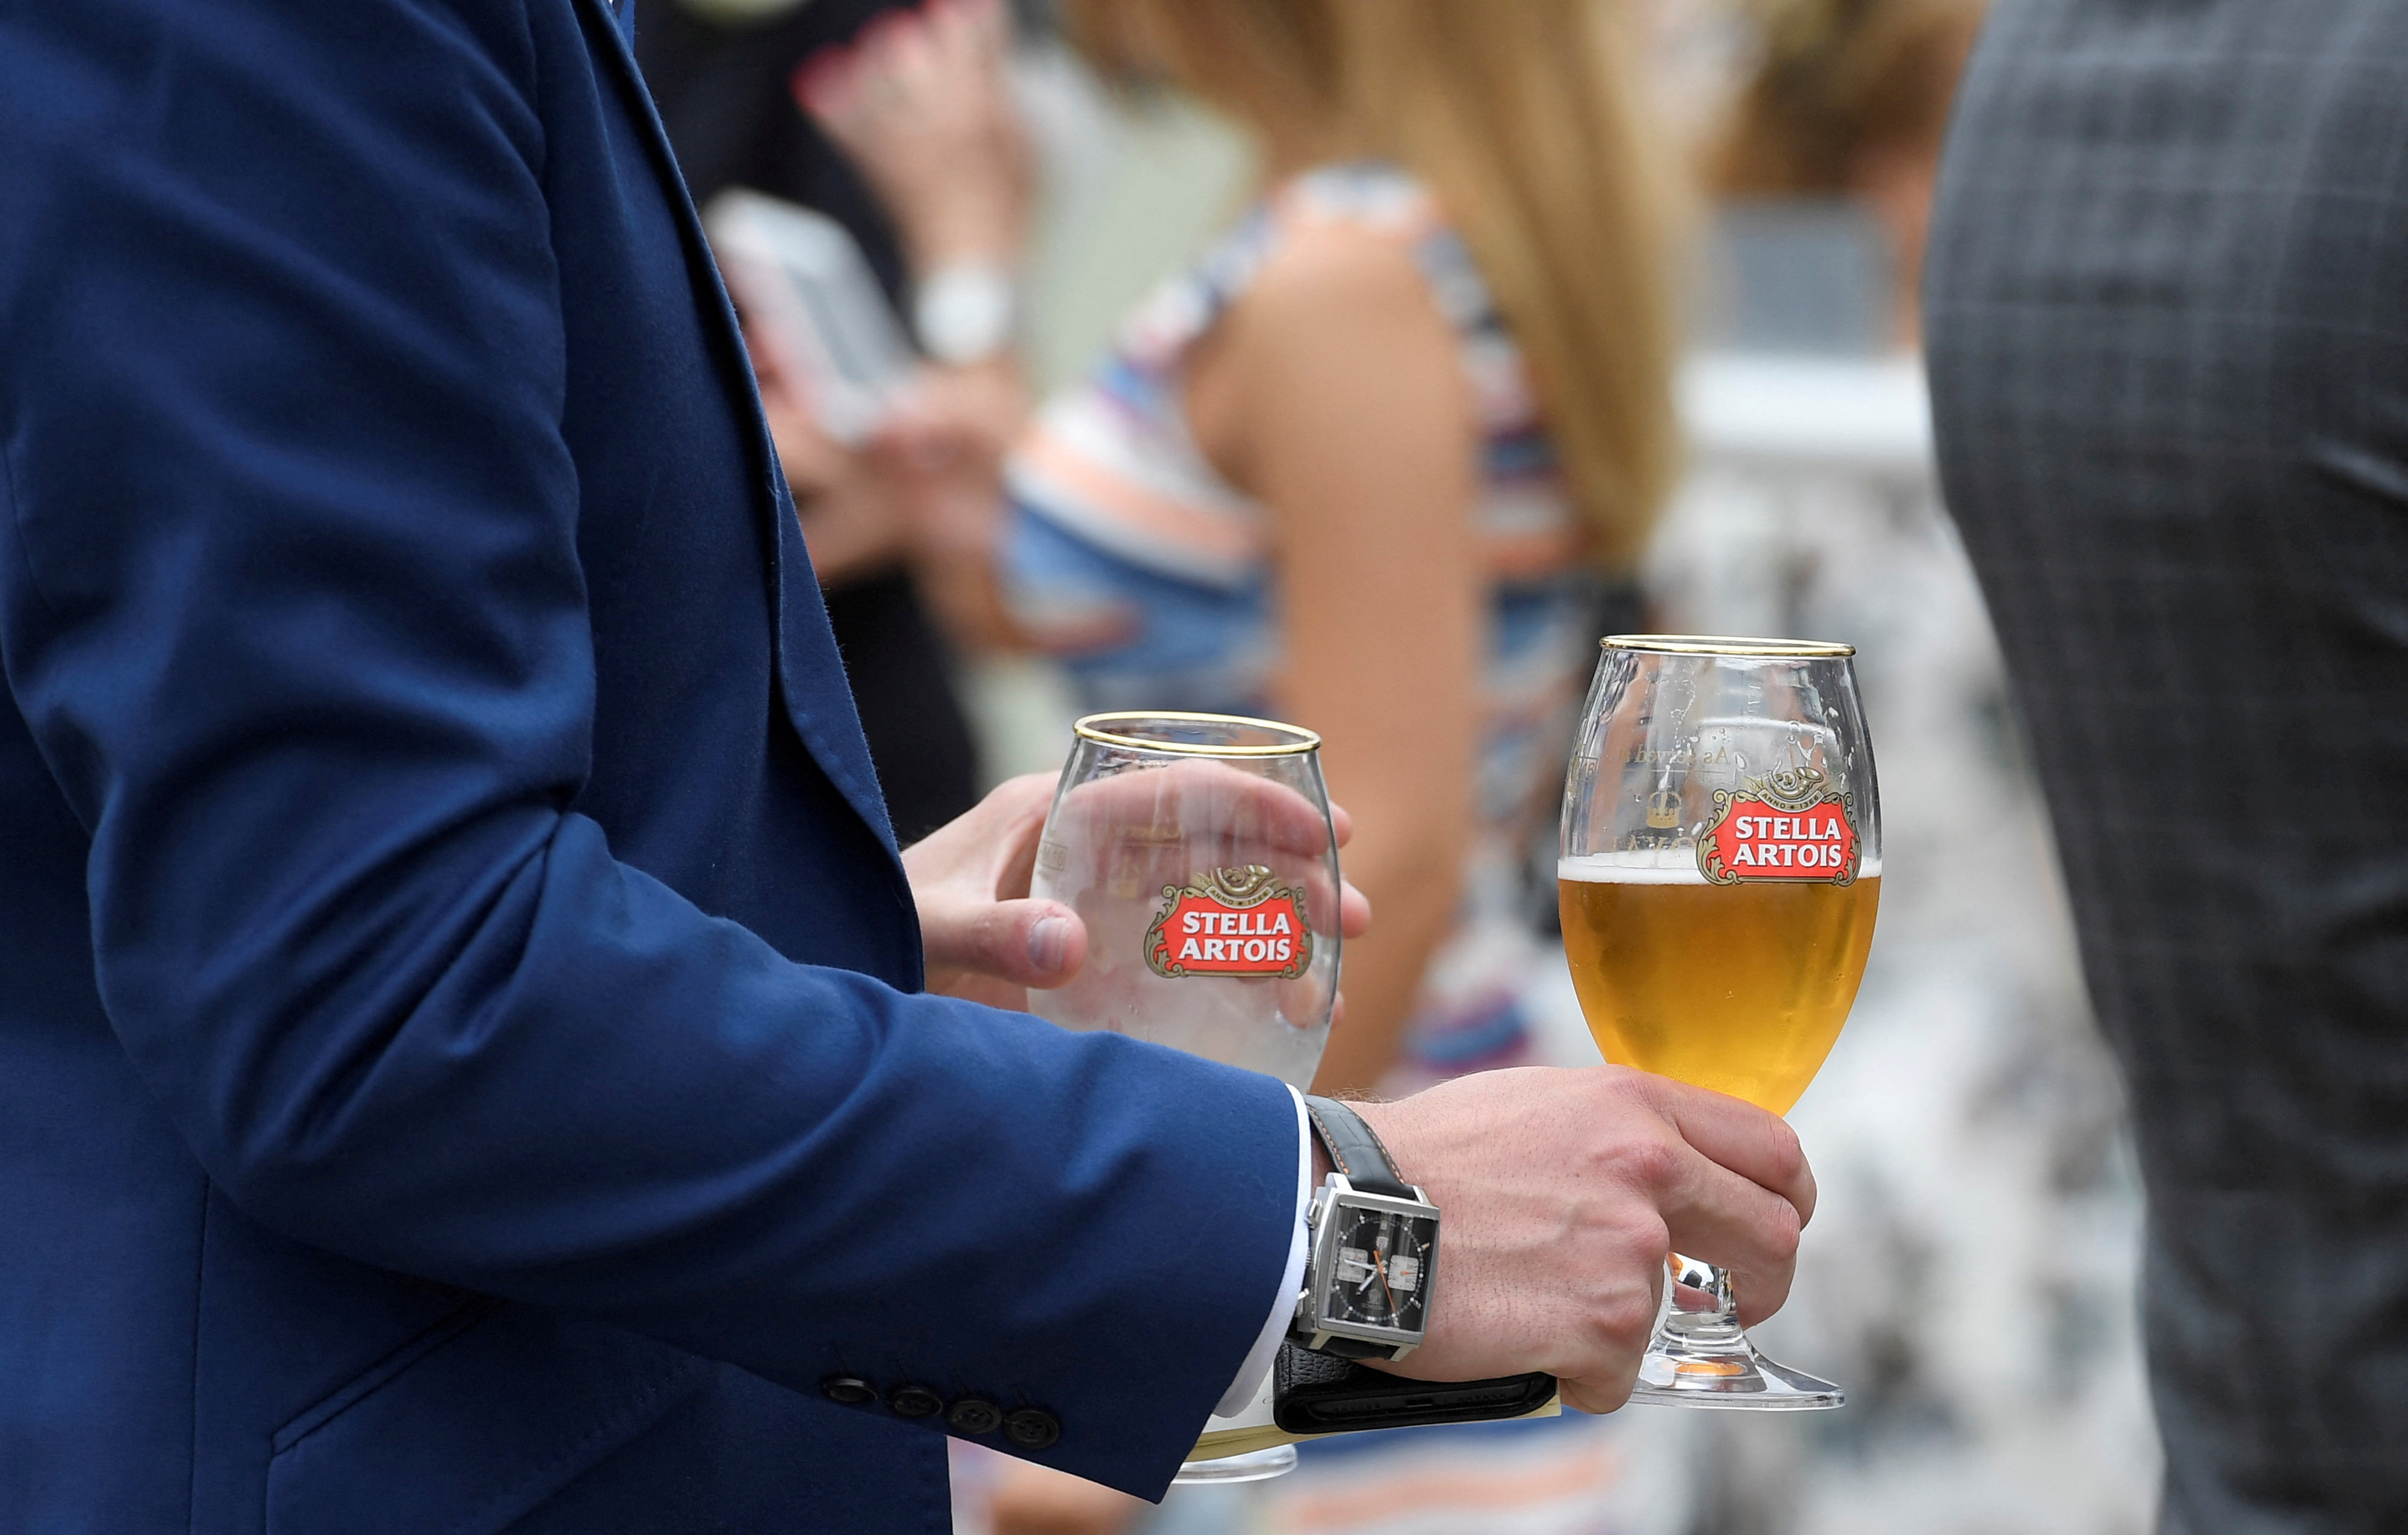 A racegoers drinks Stella Artois beer at the Ascot racecourse at Ascot